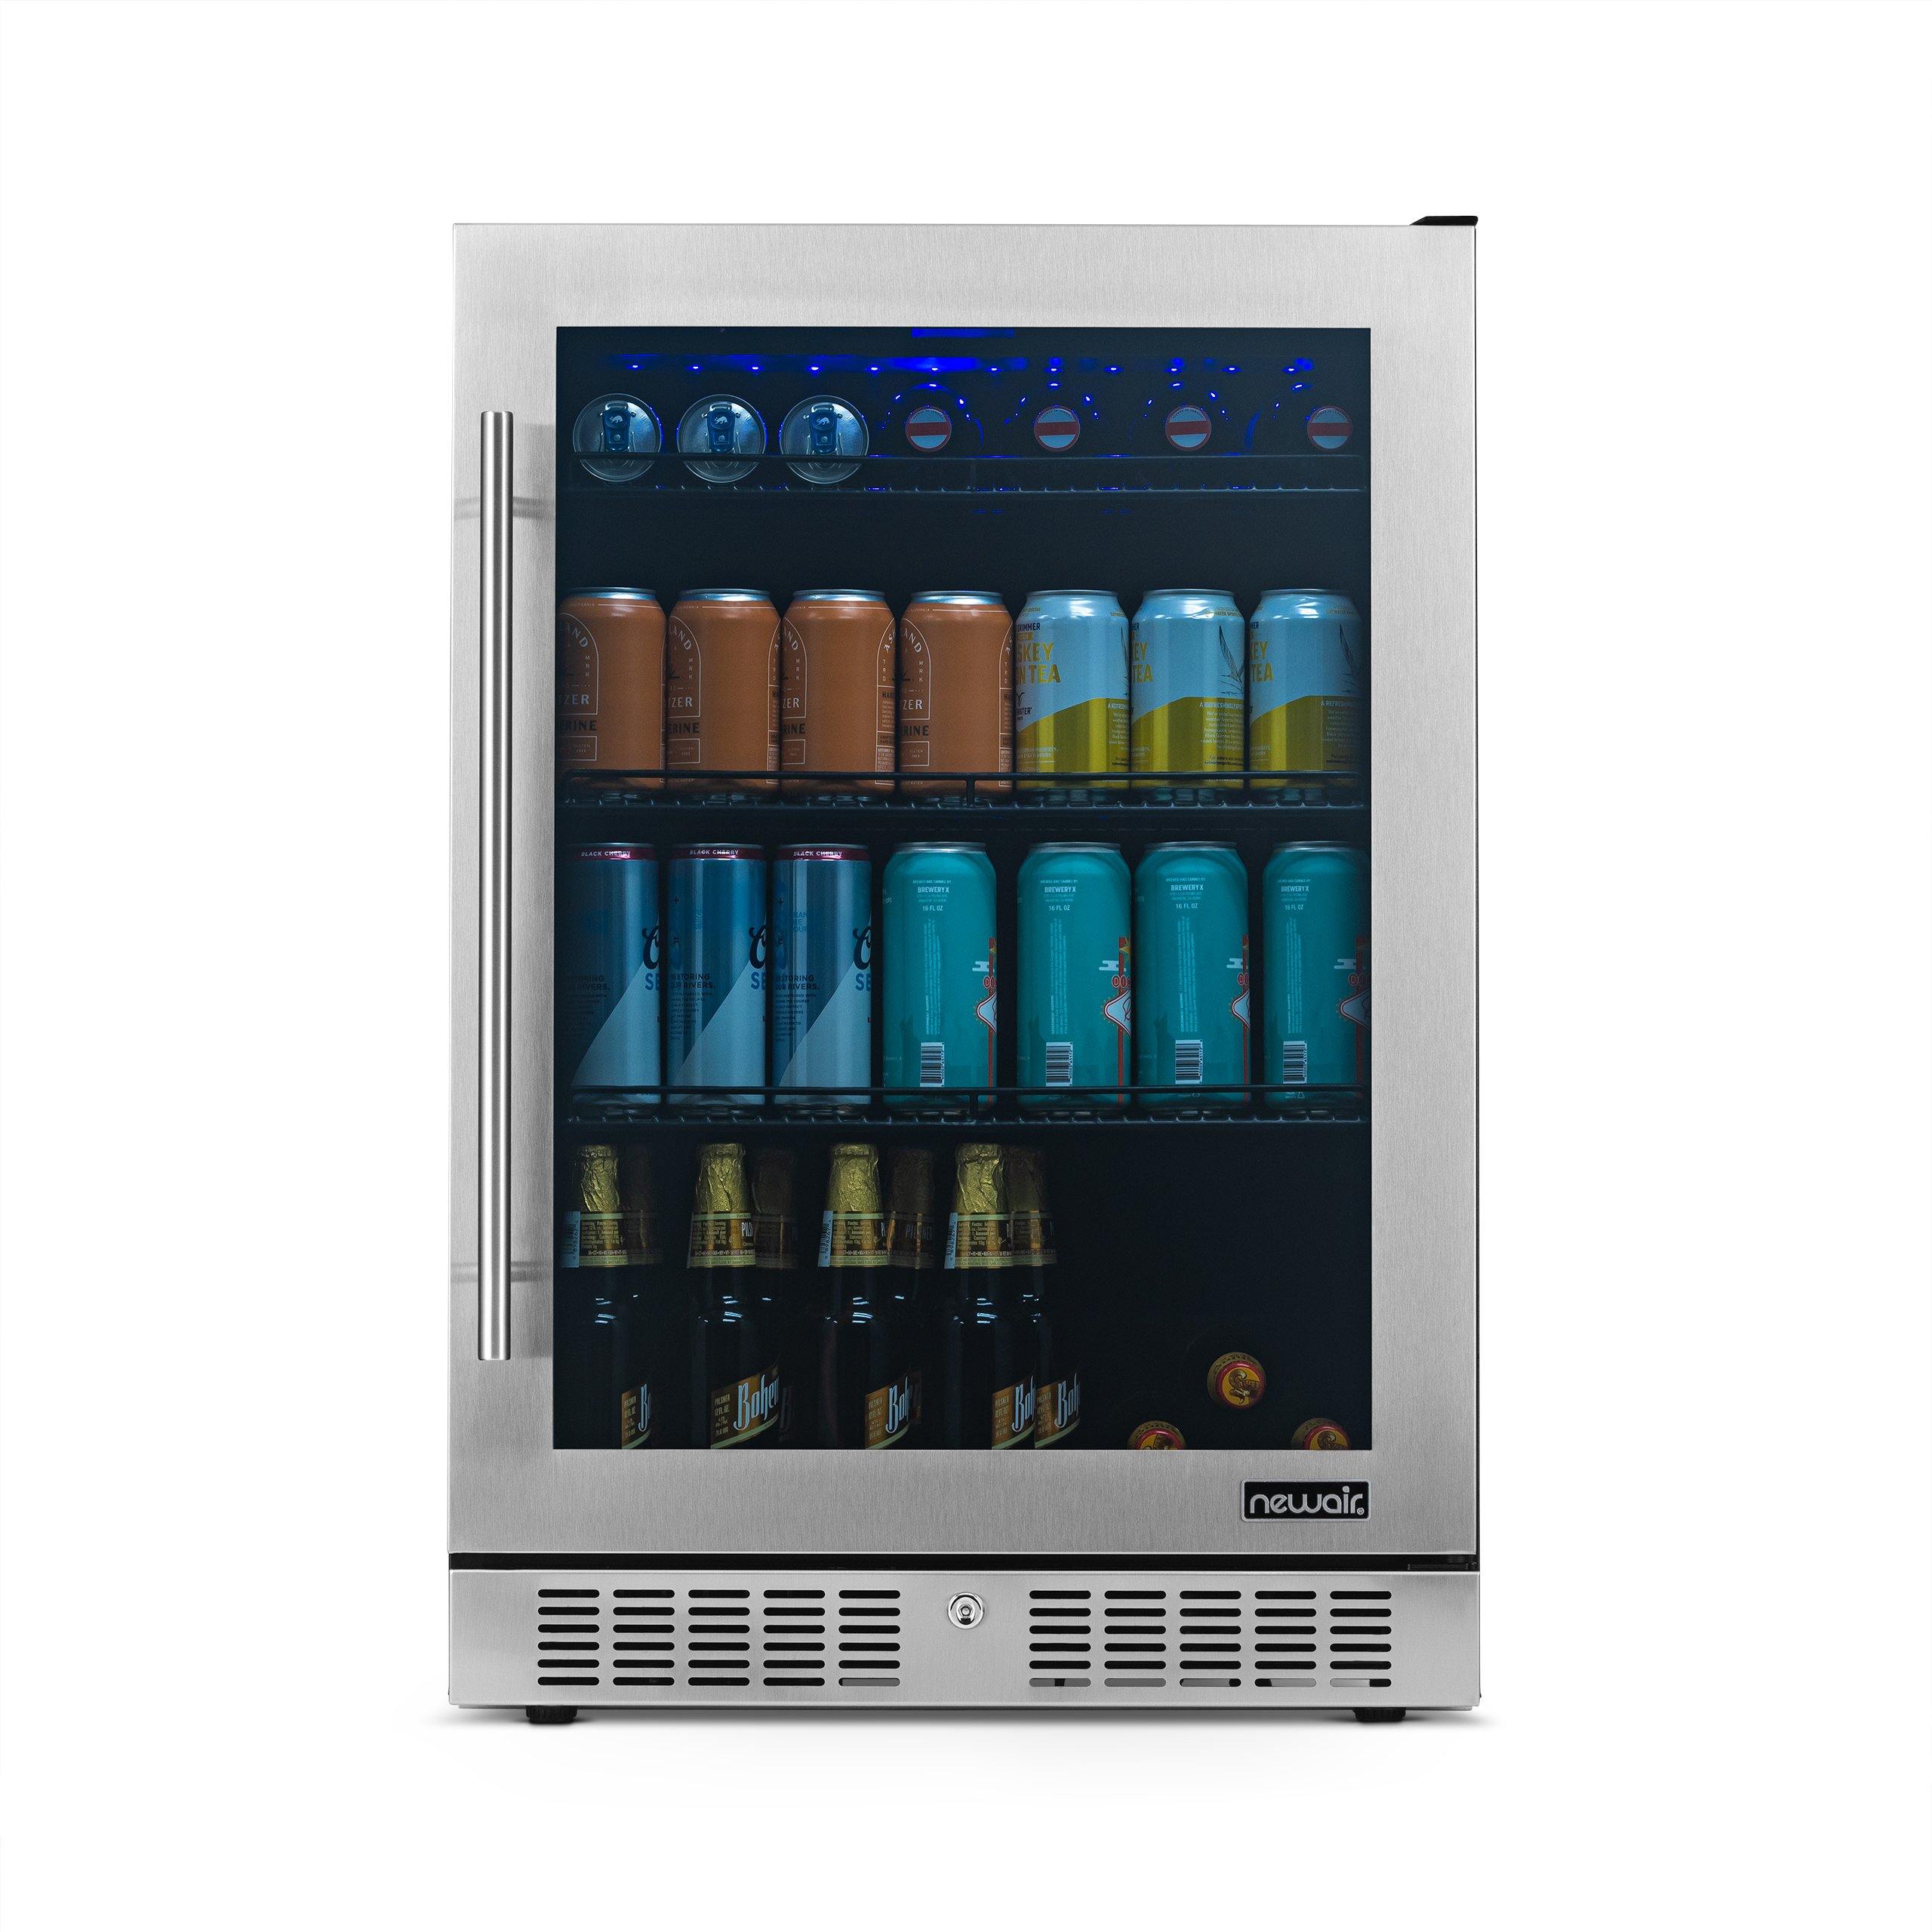 Newair - 24” 224-Can Built-in Premium Beverage Center w/ Color Changing LED Lights (NBC224SS00)